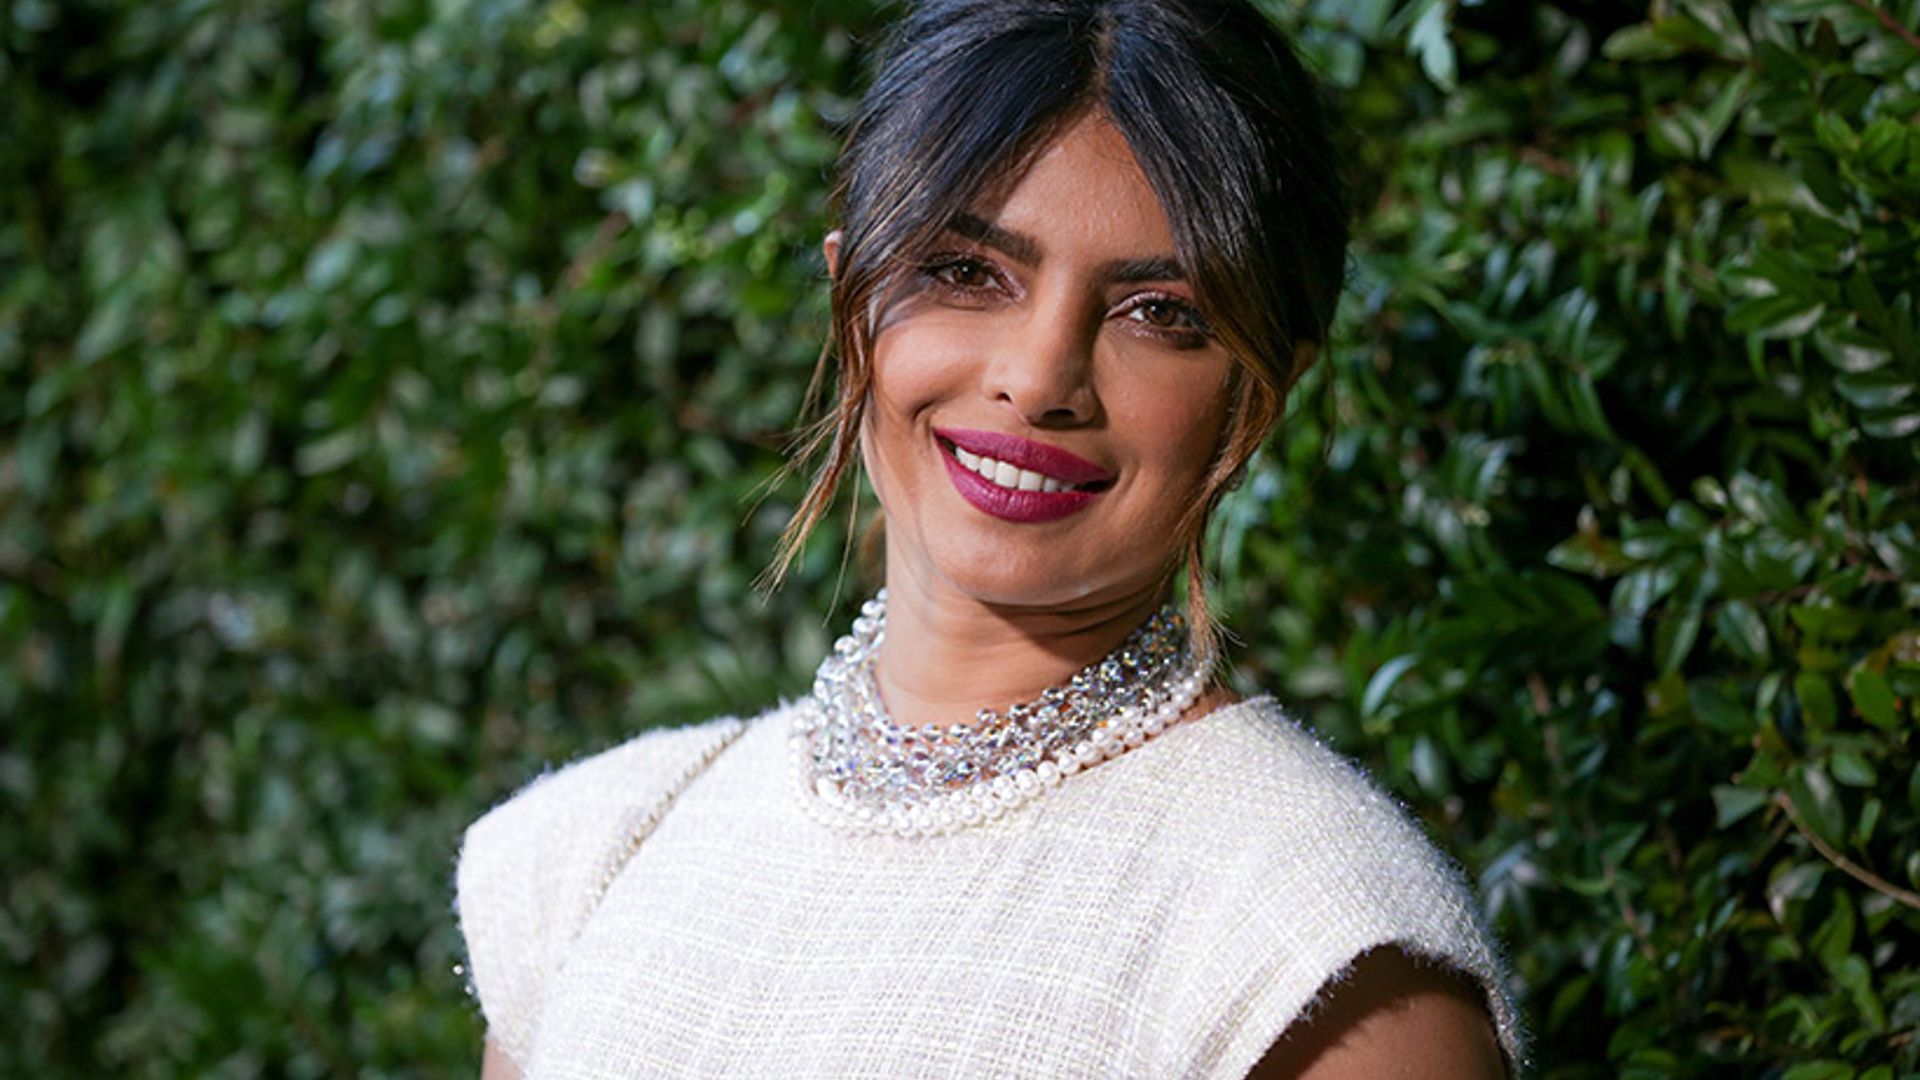 Priyanka Chopra reveals skin care secrets and uses this kitchen cupboard staple on her face